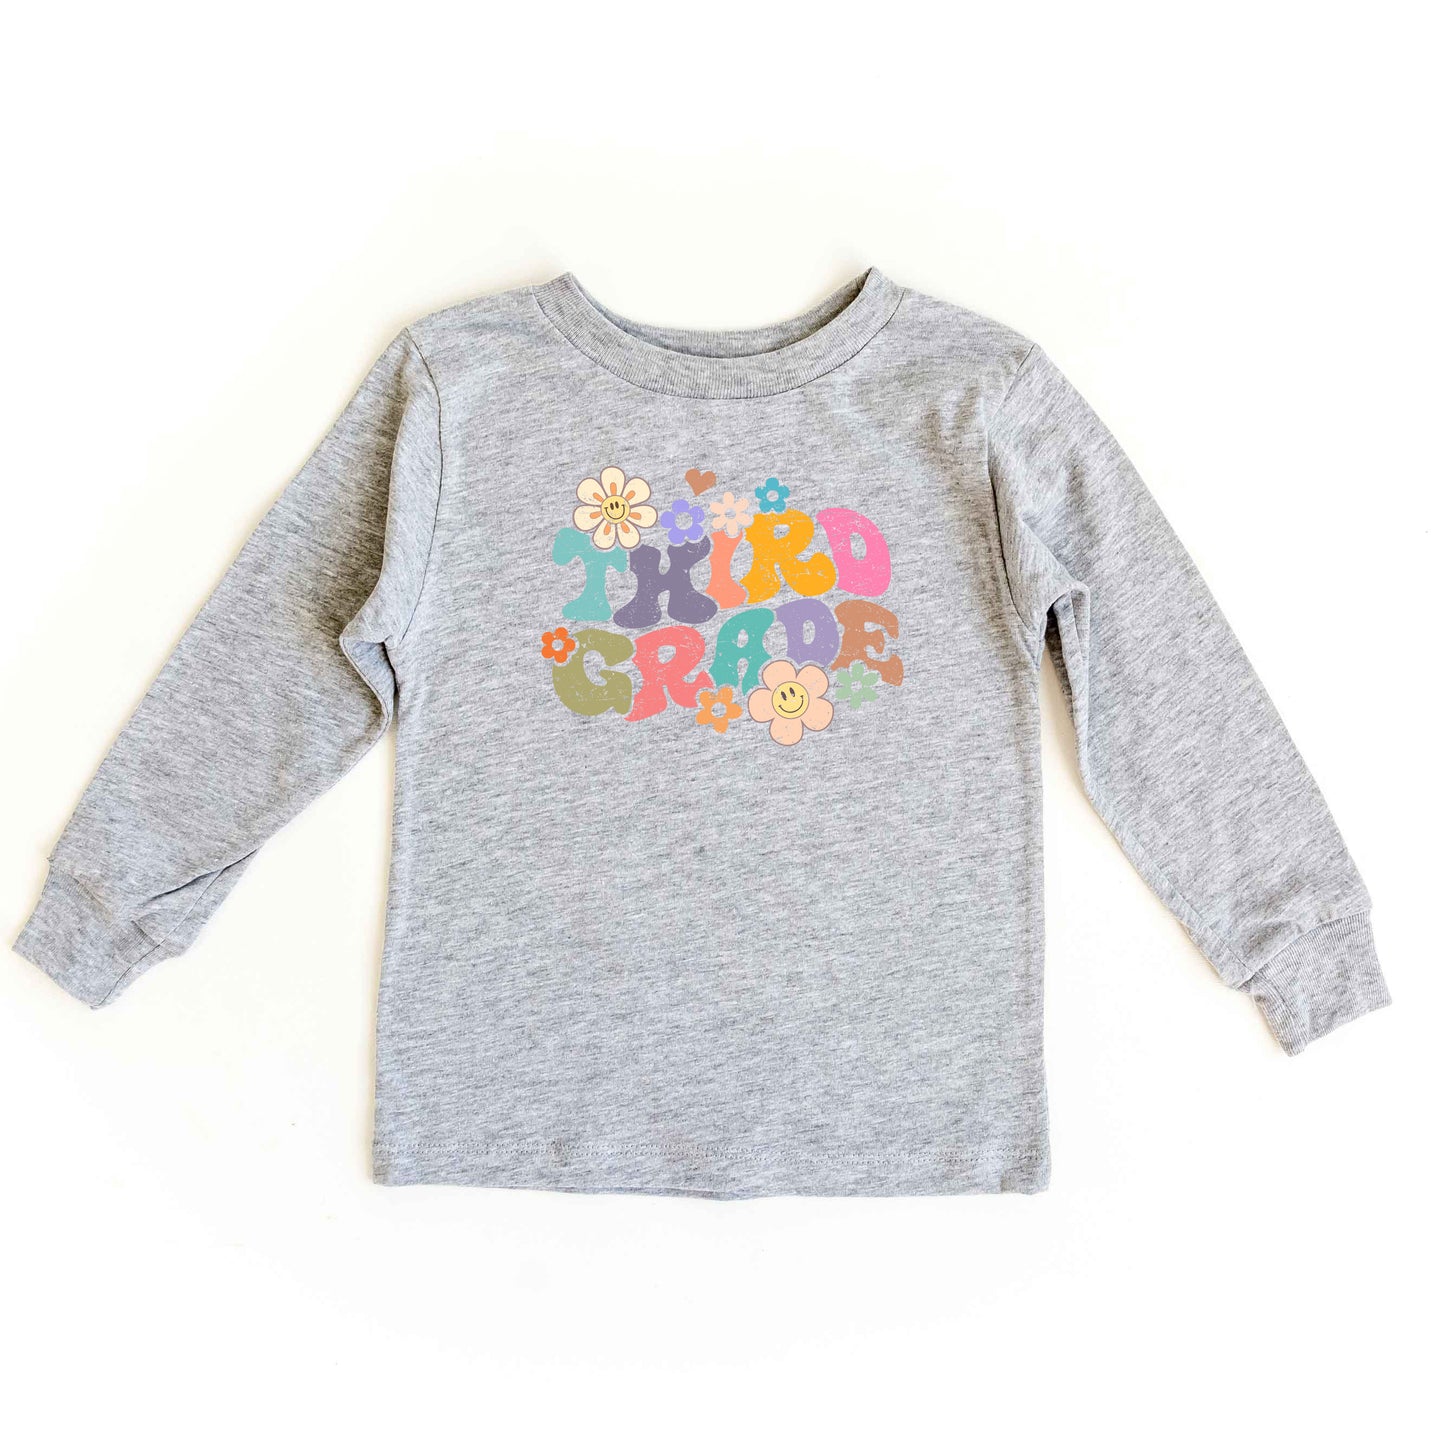 Third Grade Flowers | Youth Graphic Long Sleeve Tee